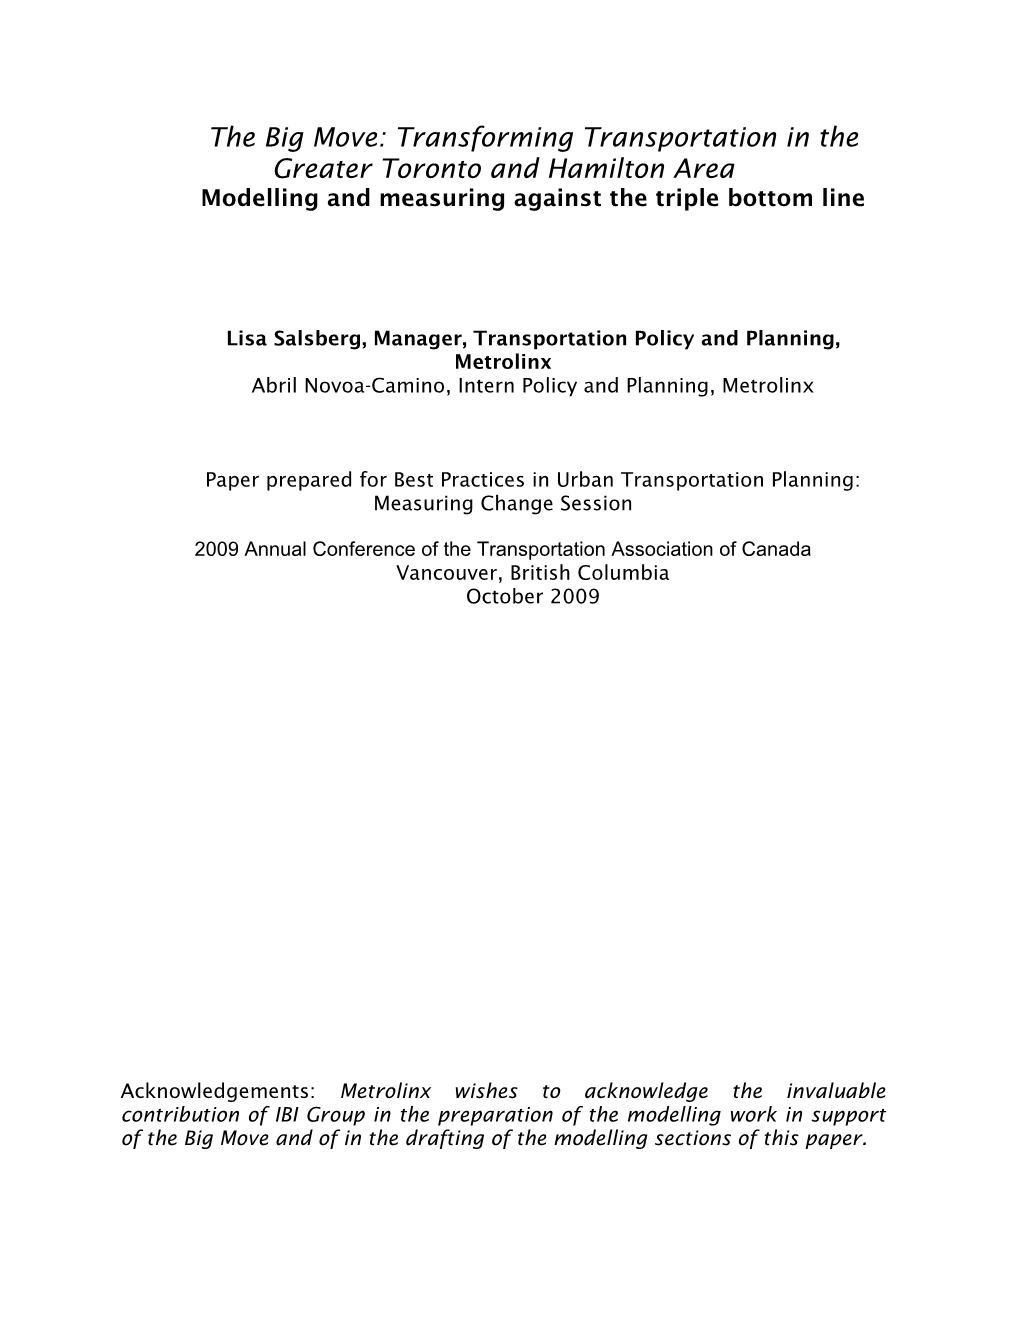 The Big Move: Transforming Transportation in the Greater Toronto and Hamilton Area Modelling and Measuring Against the Triple Bottom Line